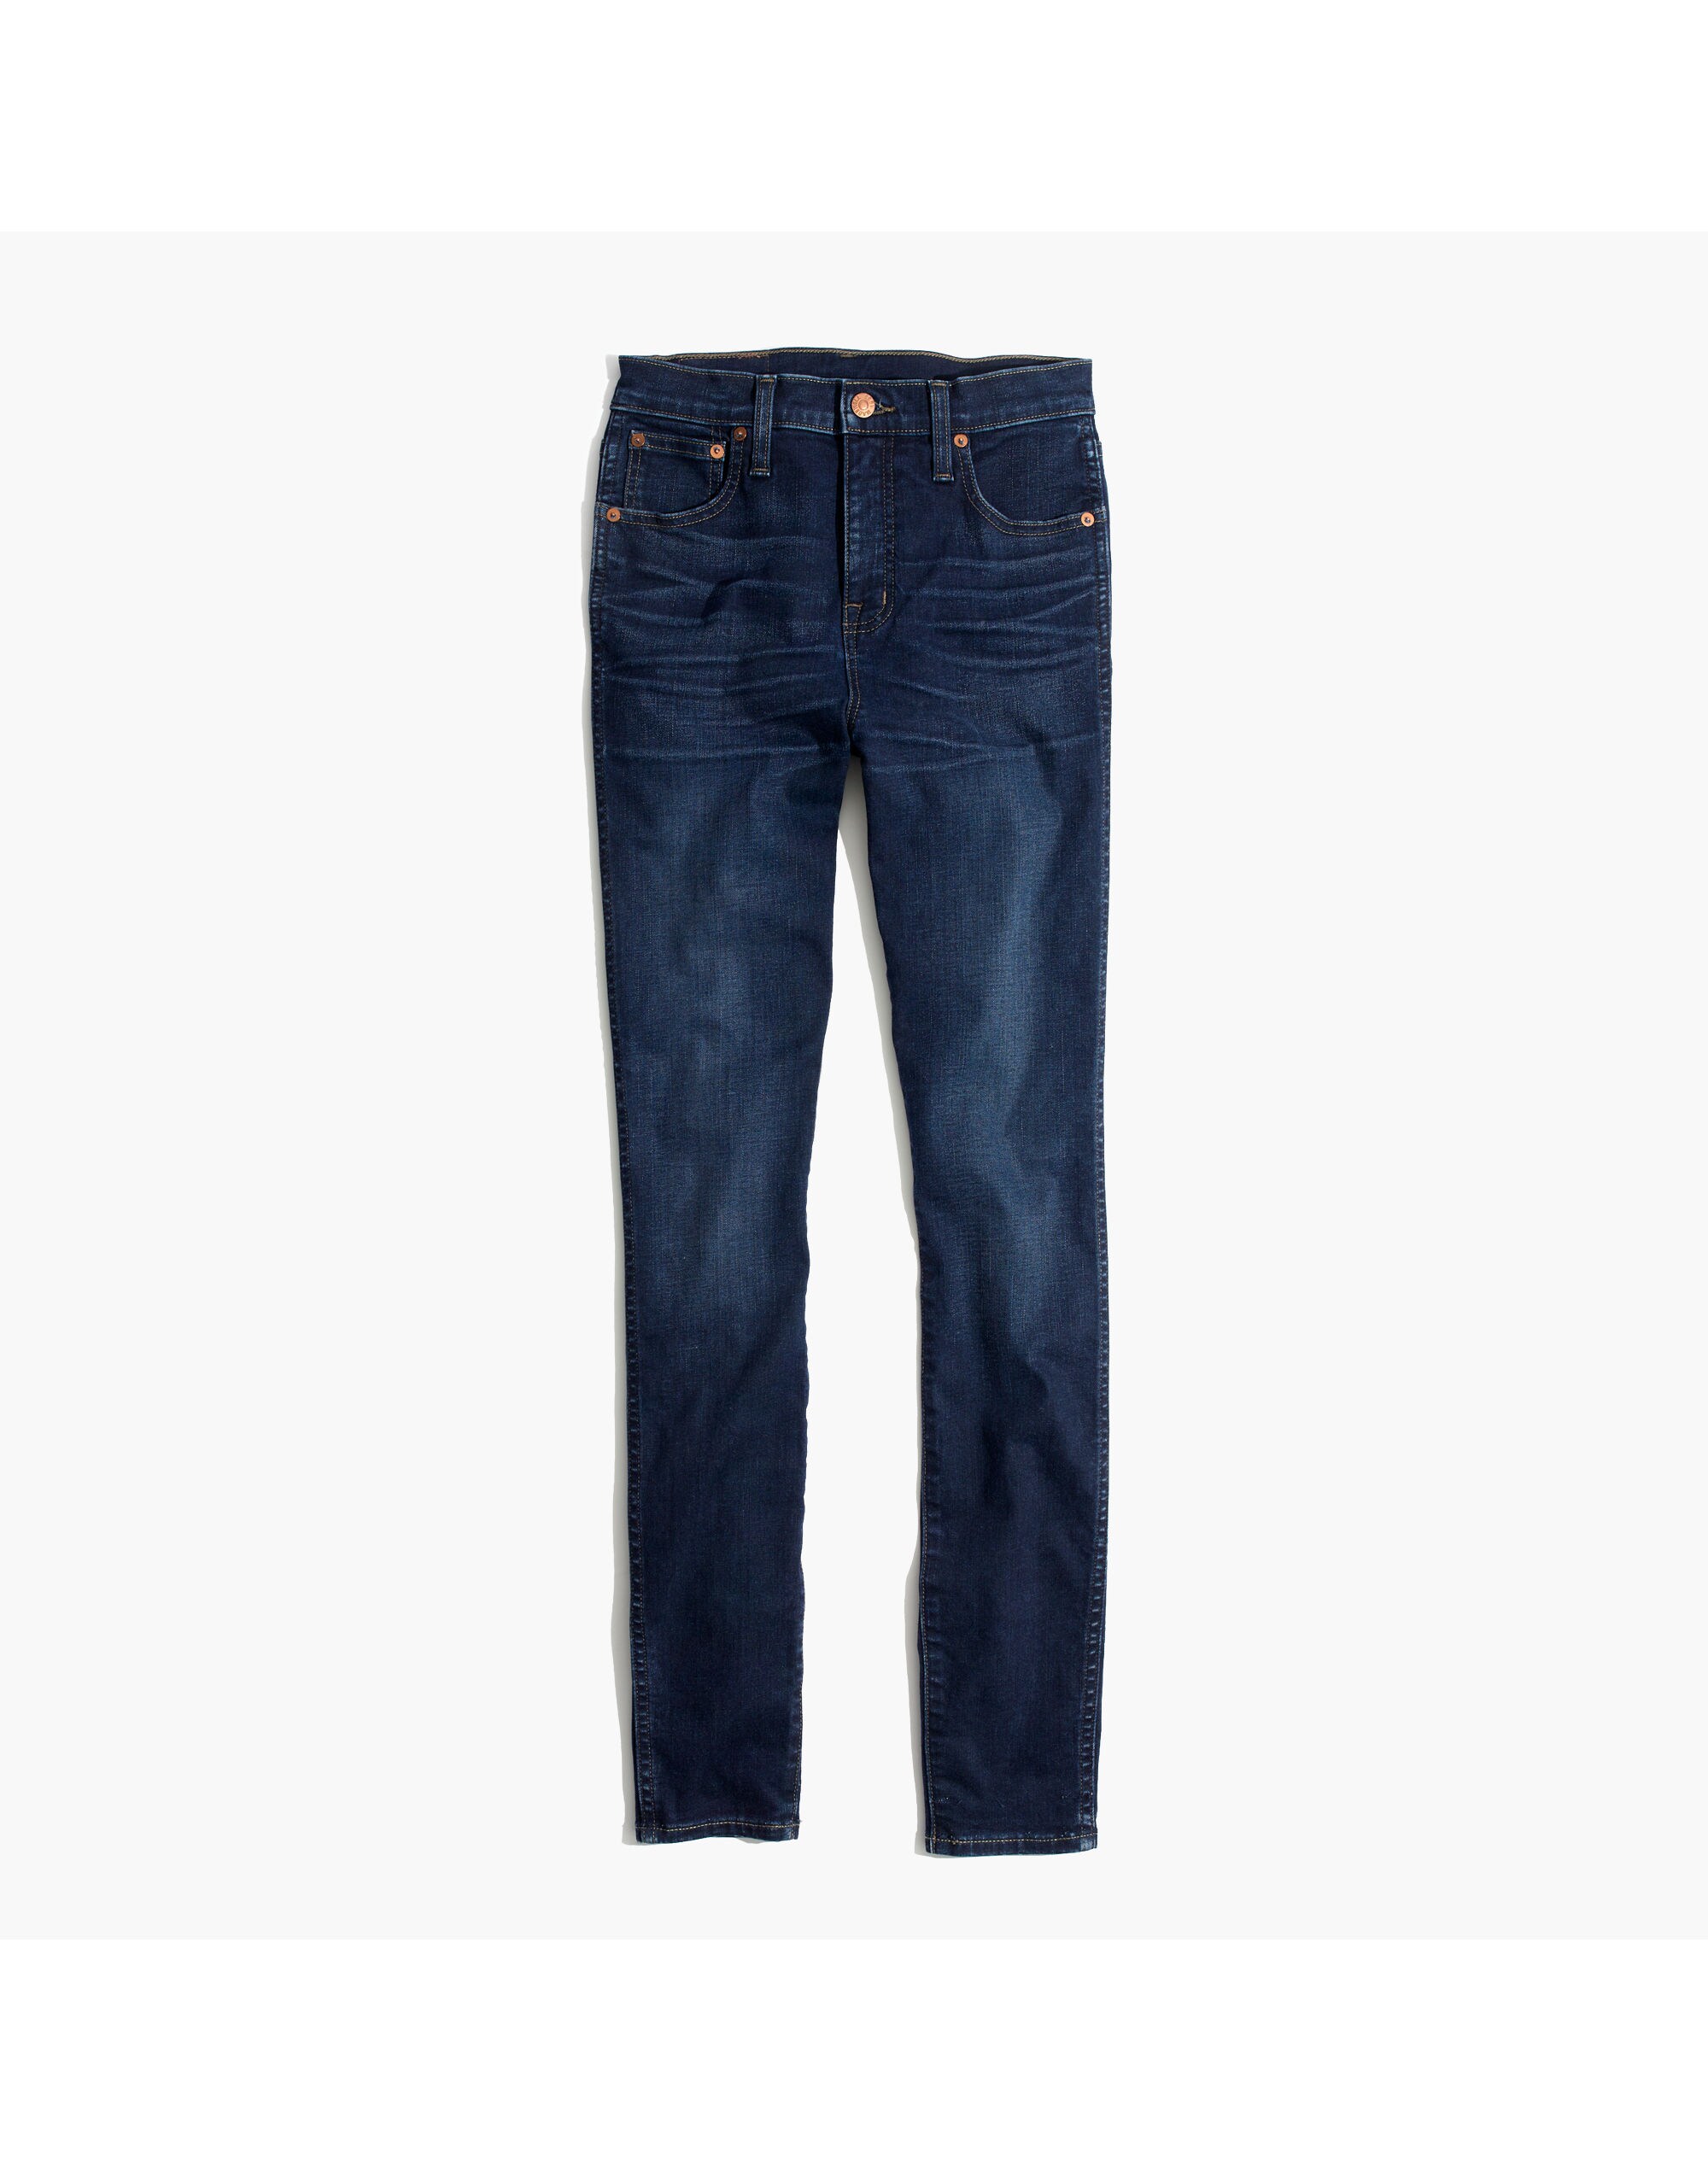 Taller 10" High-Rise Skinny Jeans in Hayes Wash